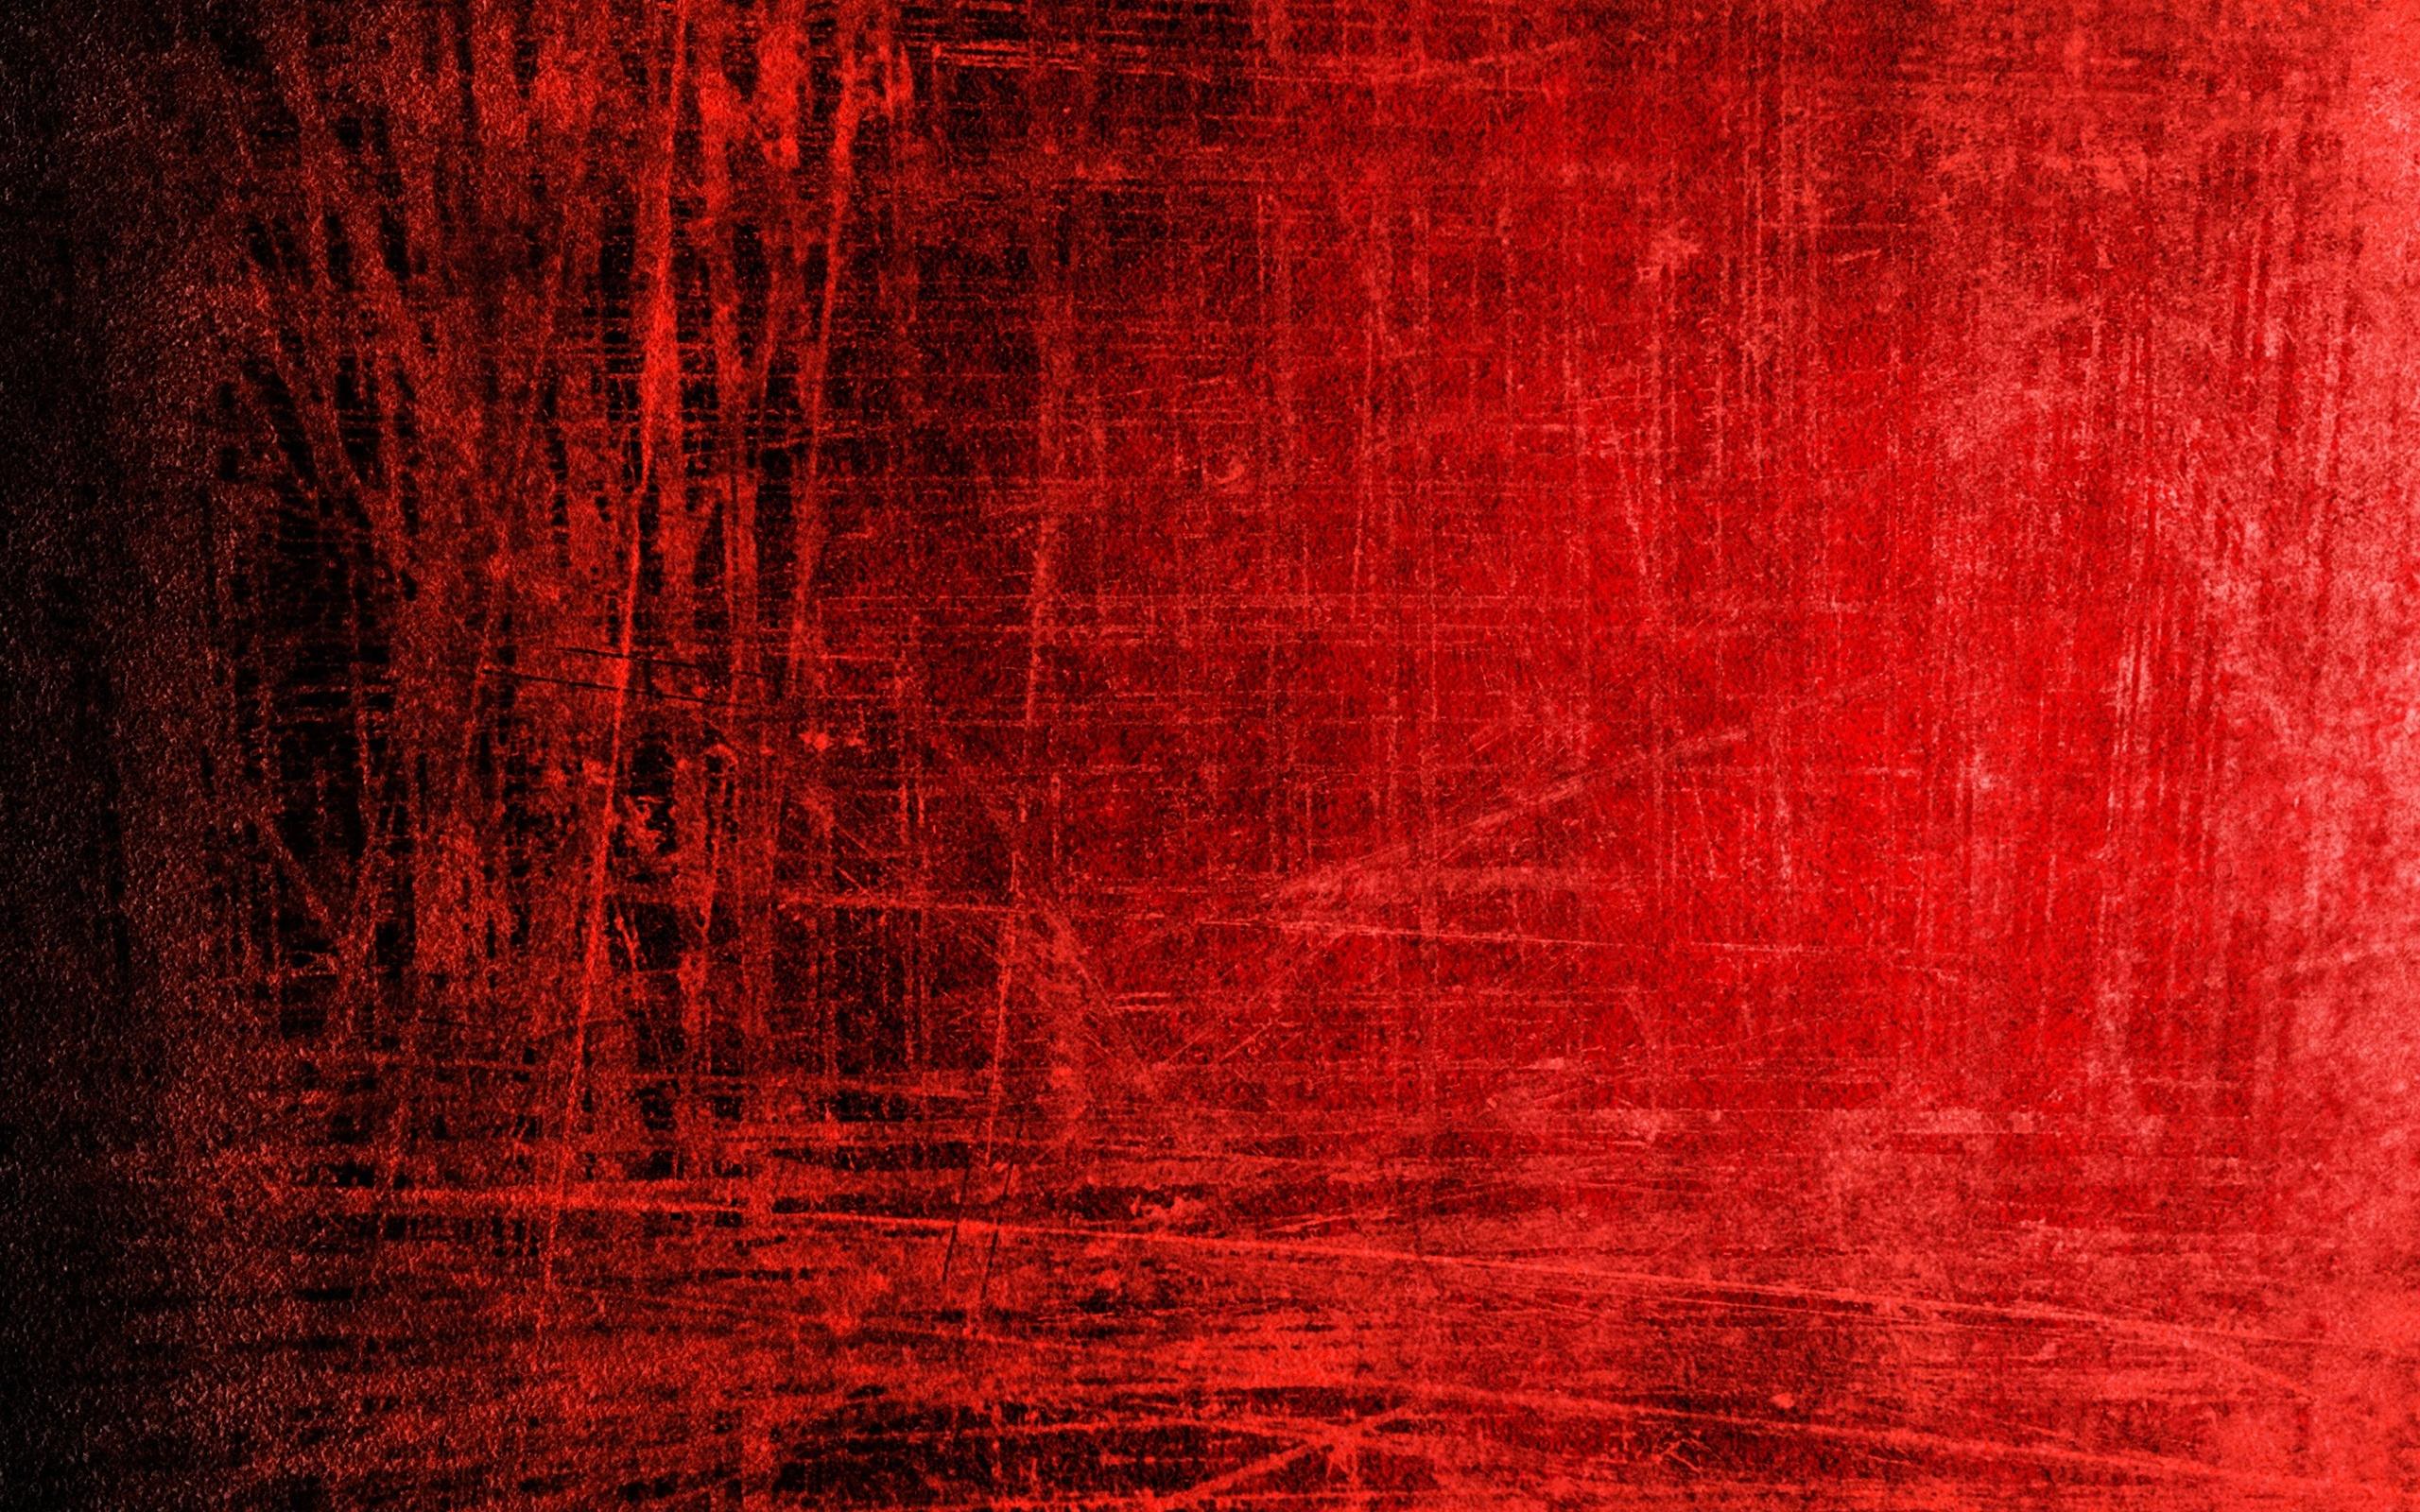 Red Background Wallpaper.com. Jewelry Making Tools & Supplies